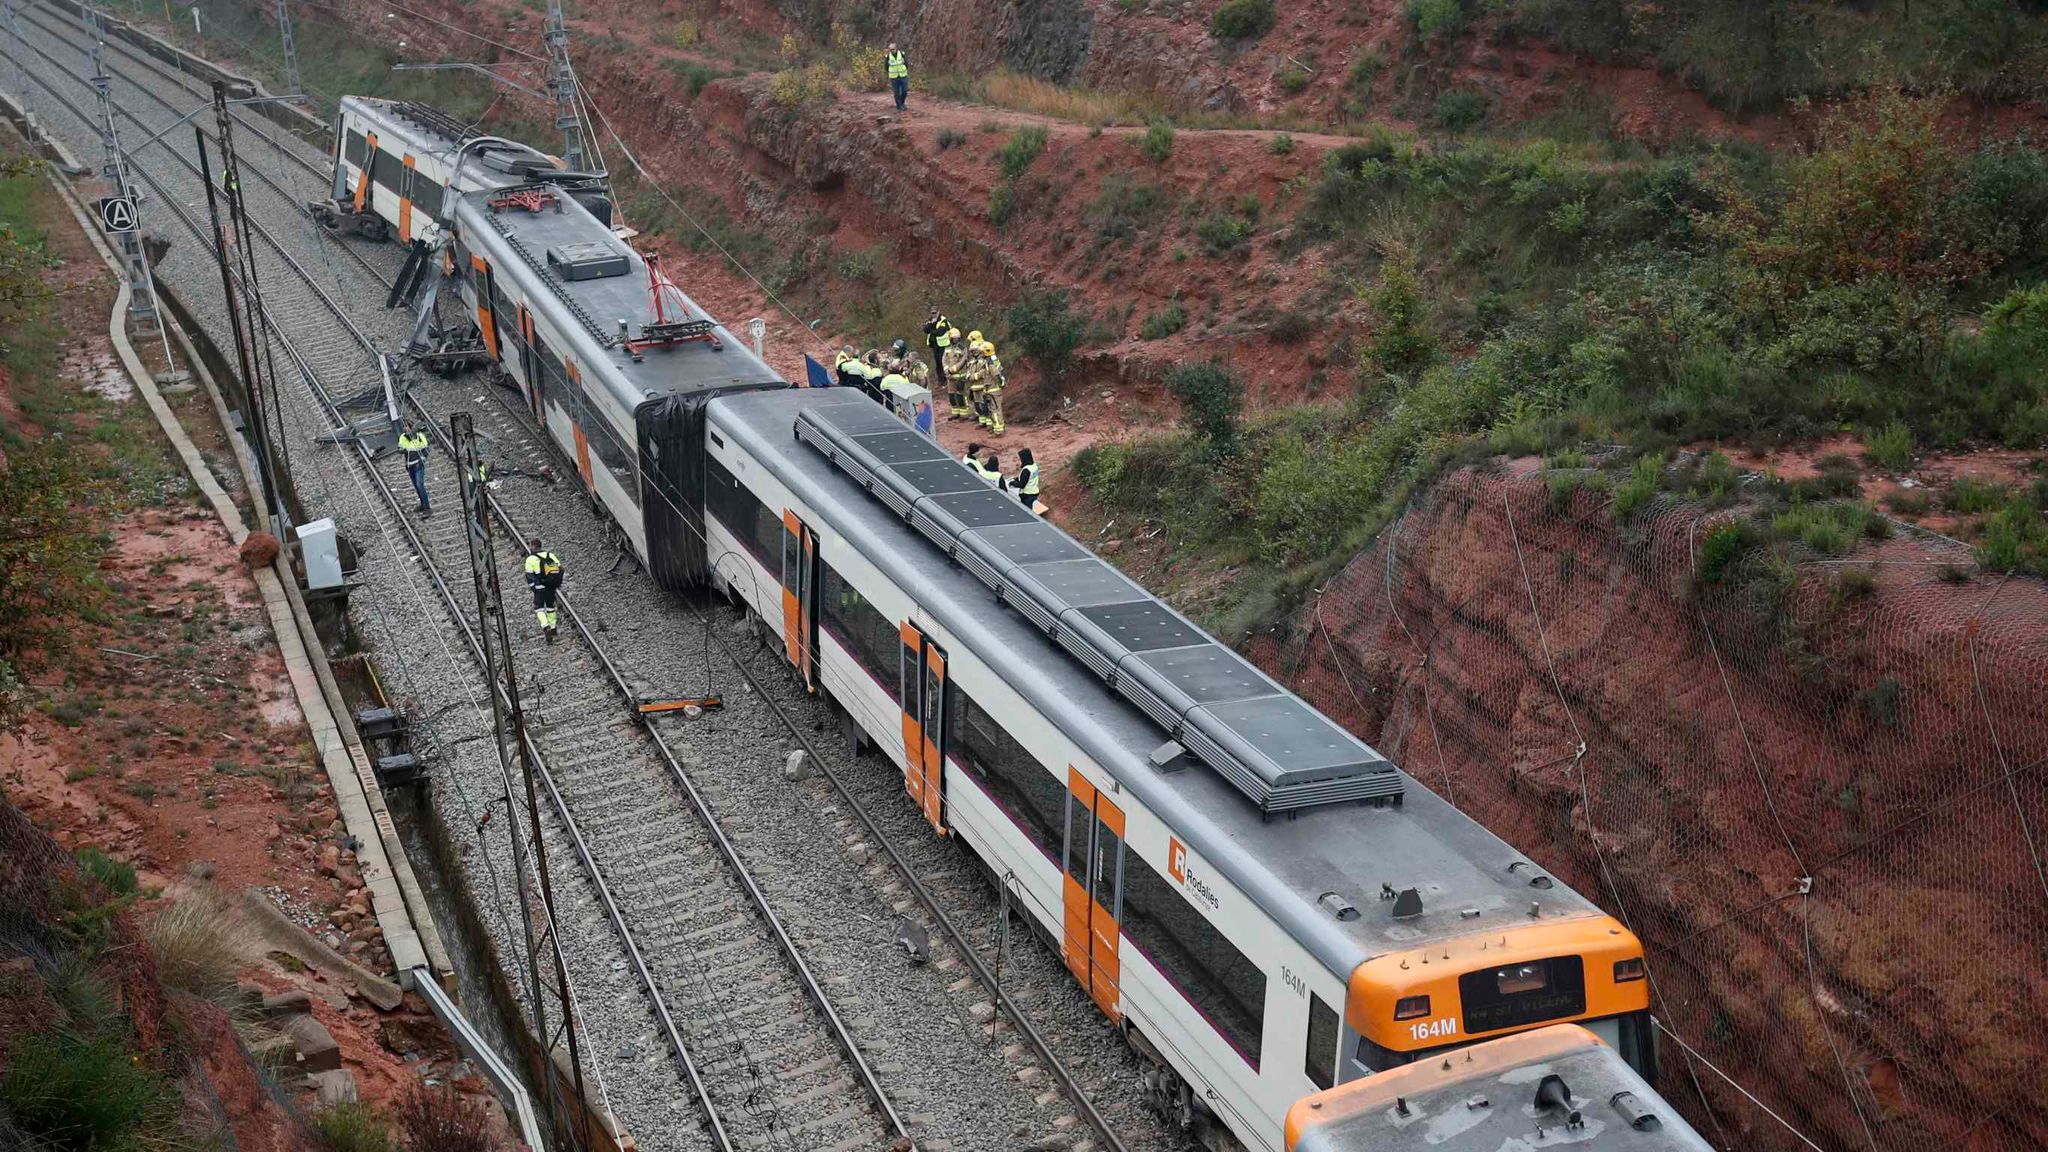 Passenger killed and others injured as train derails near Barcelona